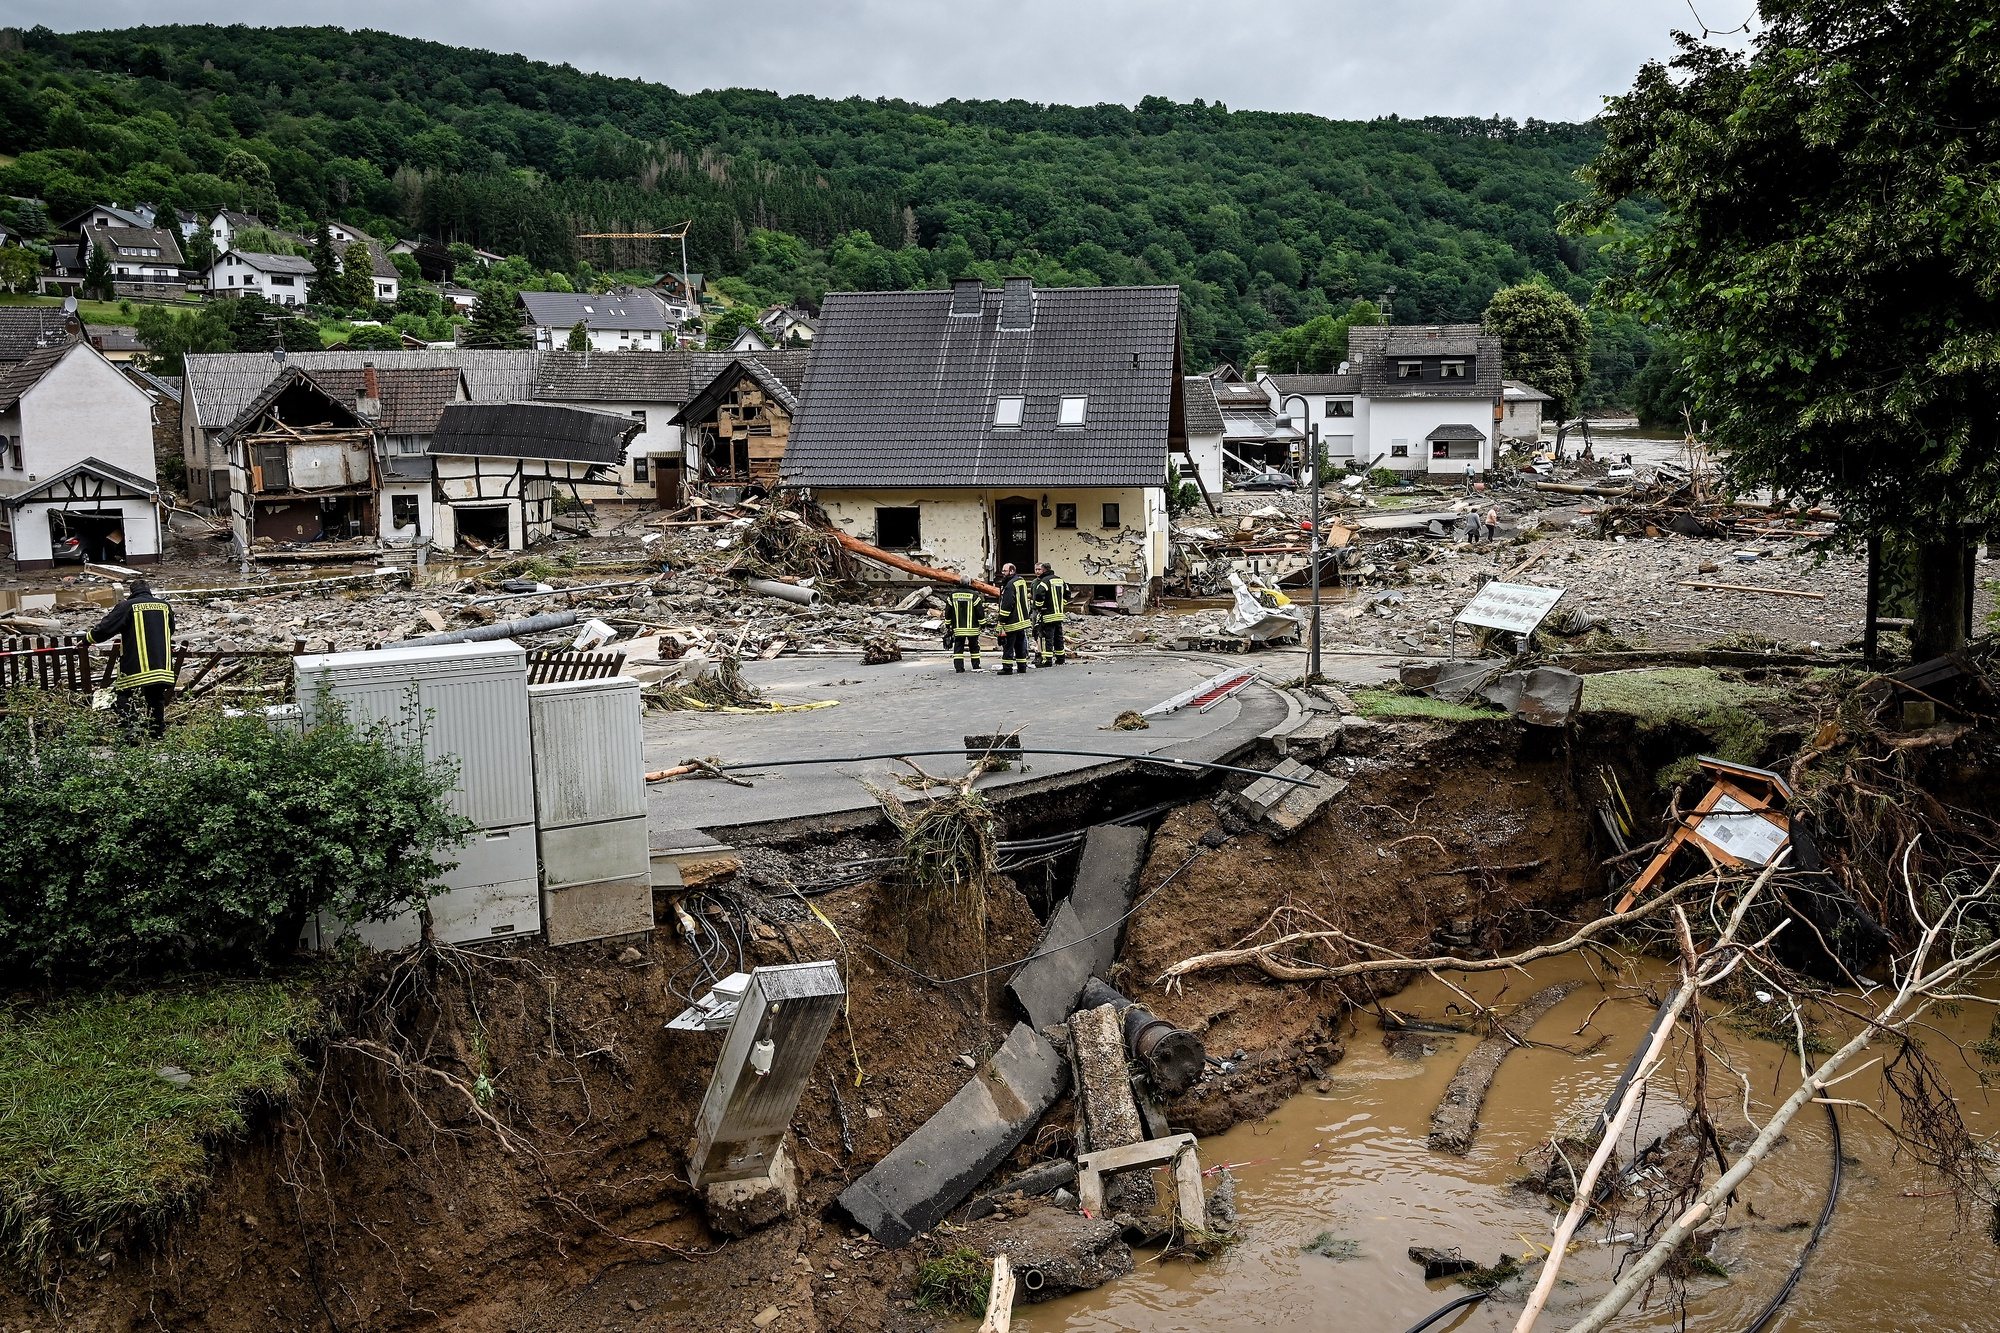 epa09346717 A view of the damage at village of Schuld in the district of Ahrweiler after heavy flooding of the river Ahr, in Schuld, Germany, 15 July 2021. Large parts of Western Germany were hit by heavy, continuous rain in the night to 14 July, resulting in local flash floods that destroyed buildings and swept away cars.  EPA/SASCHA STEINBACH